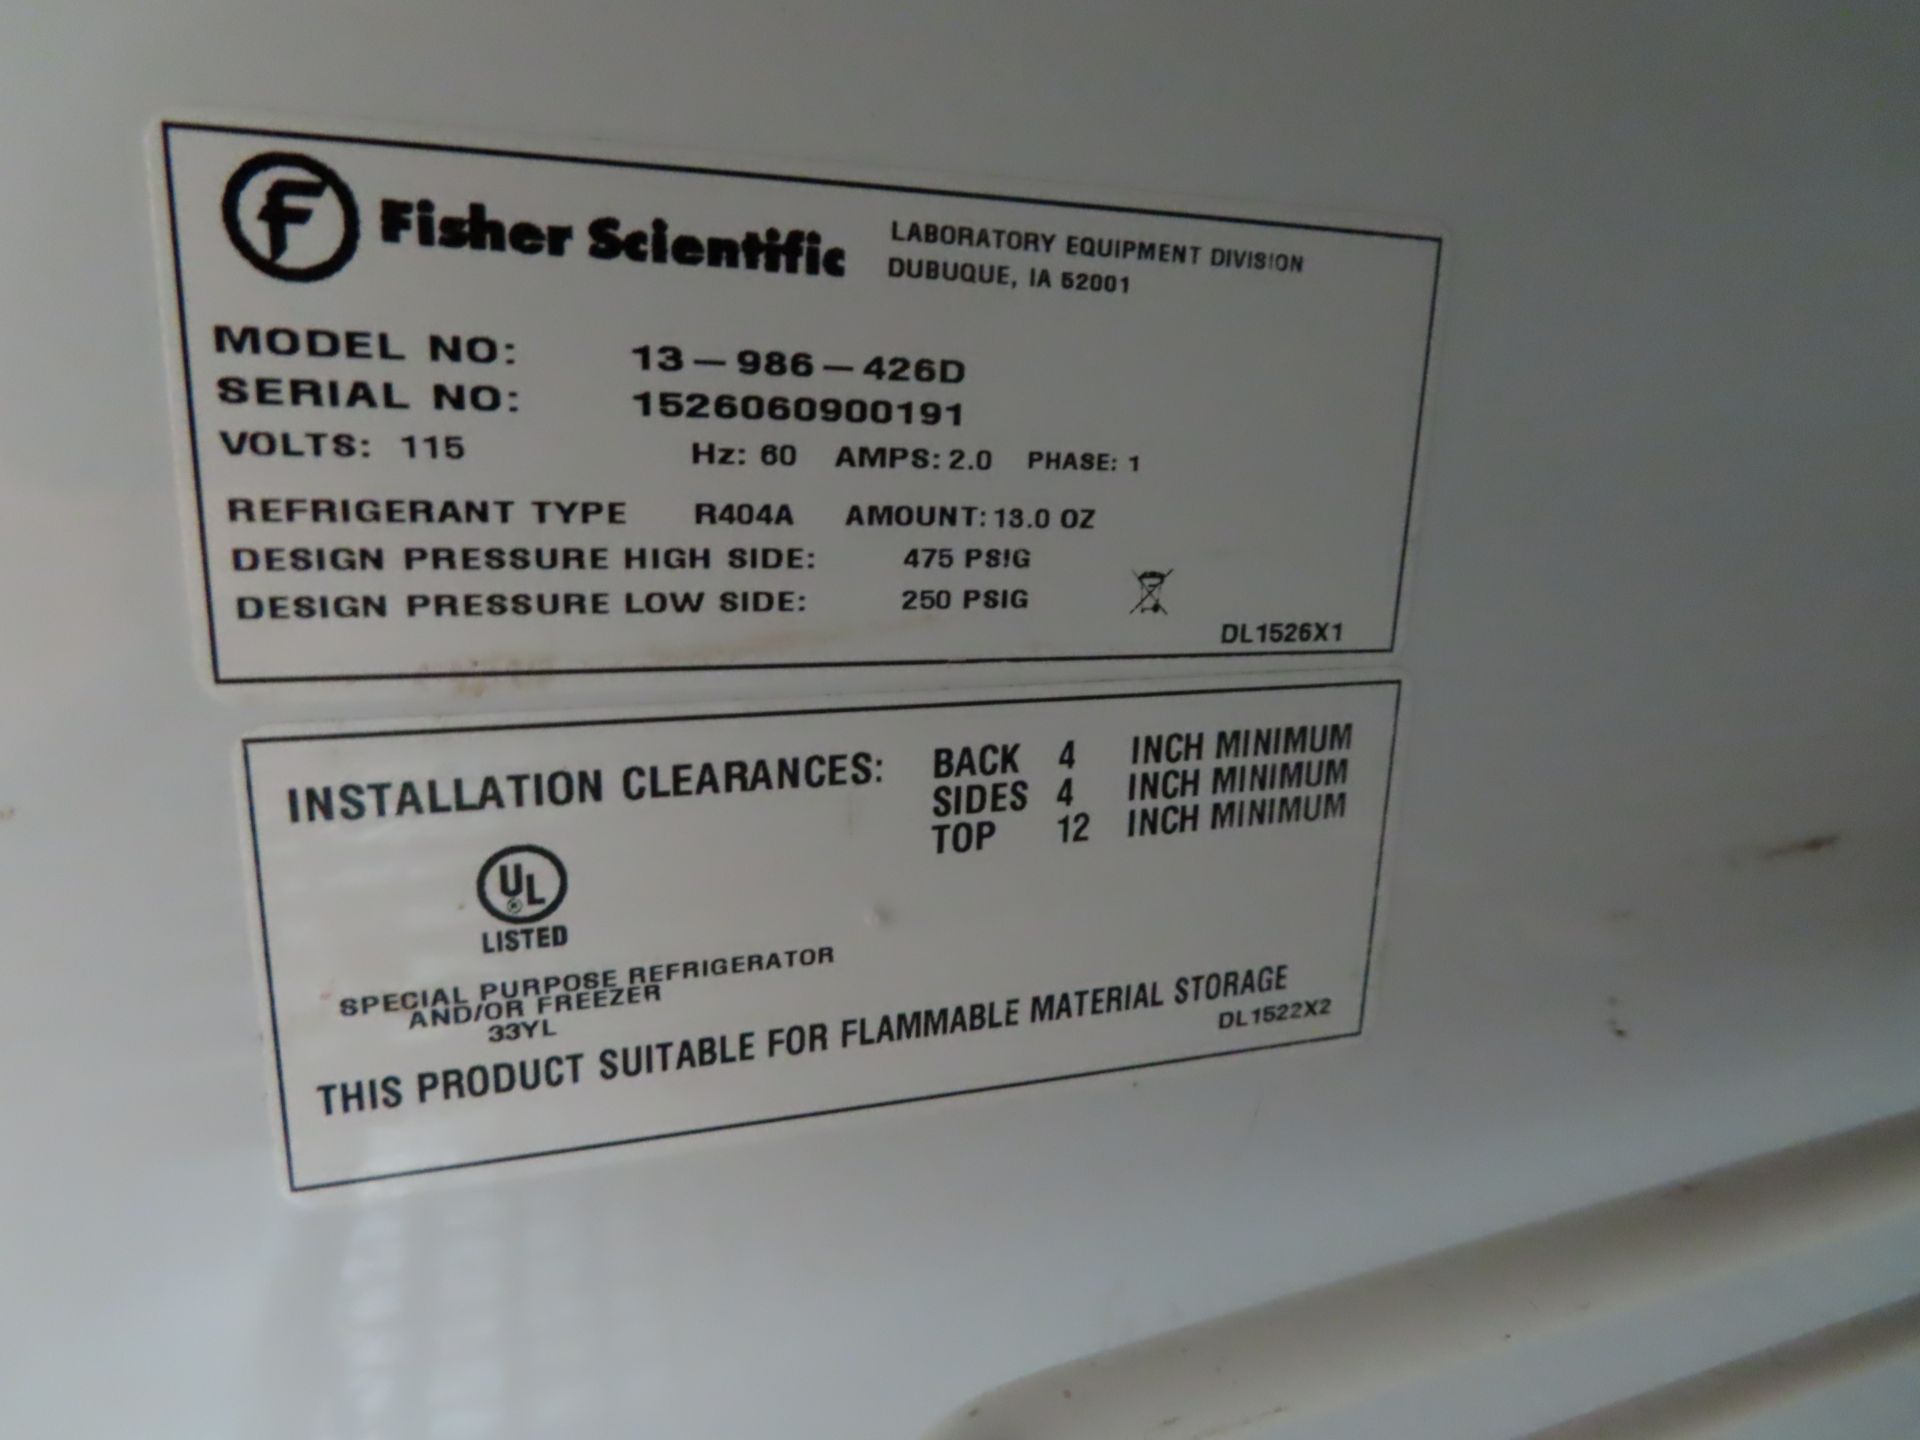 Fisher Isotemp flammable material storage refrigerator, located C wing 4th floor, room 465A - Image 2 of 2